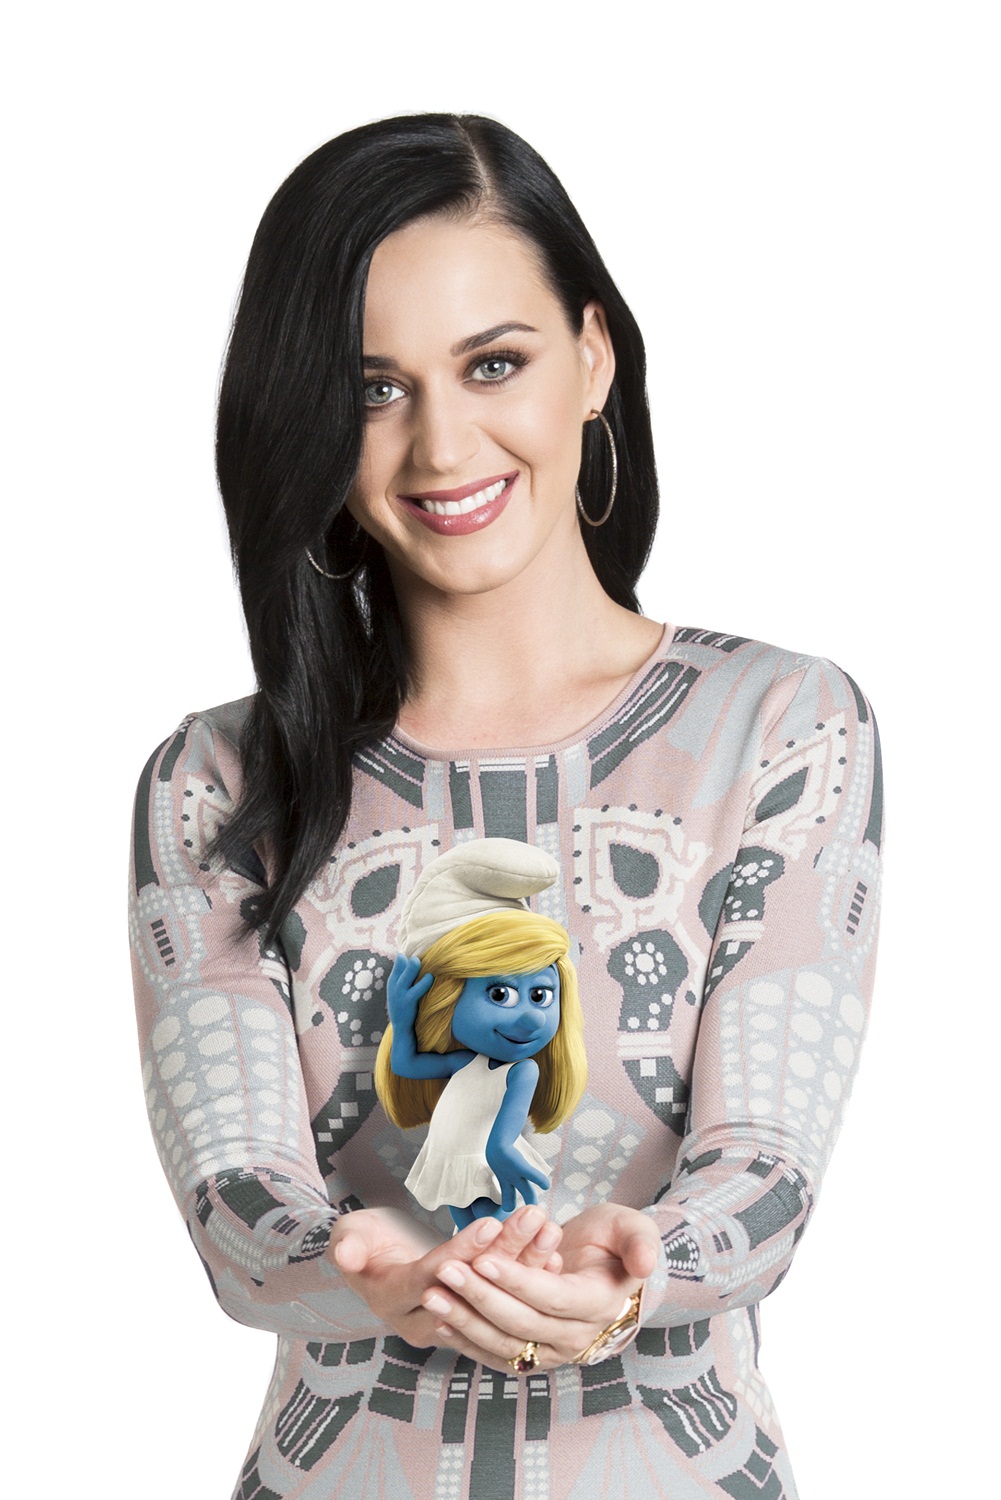 General photo of Katy Perry